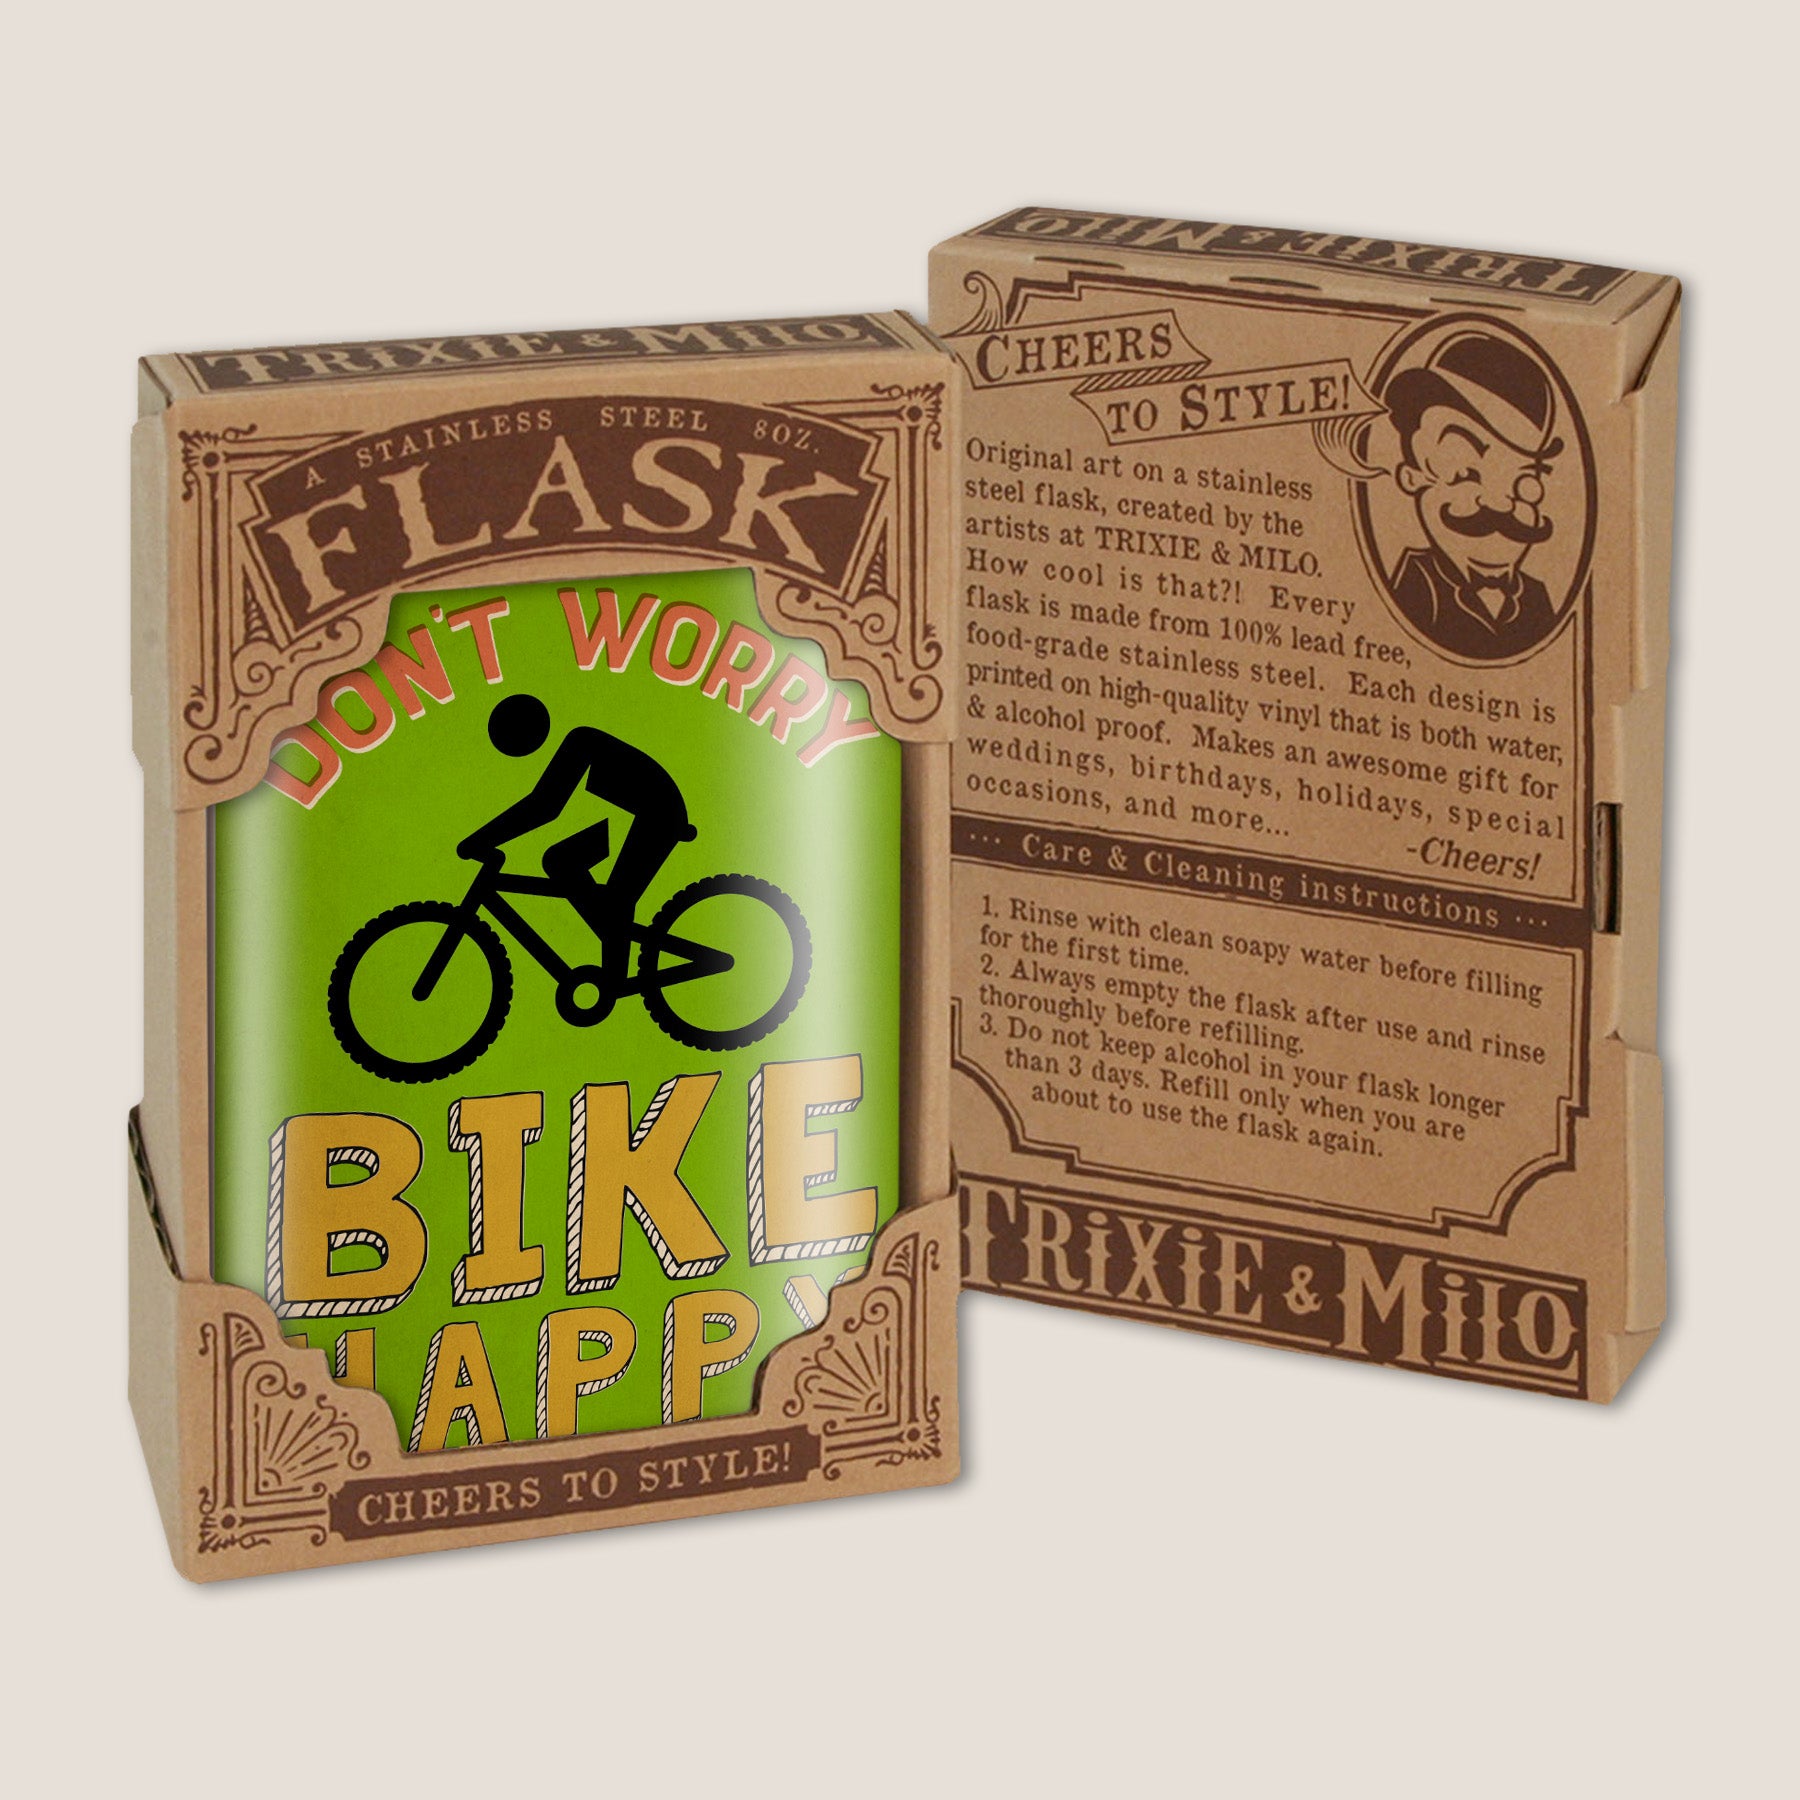 8oz Hip Flask: Don't Worry, Bike Happy Kick off every holiday or party with confidence. Cool stylish stainless steel drinking flask. Designed for durability and retro aesthetic appeal in gfit box